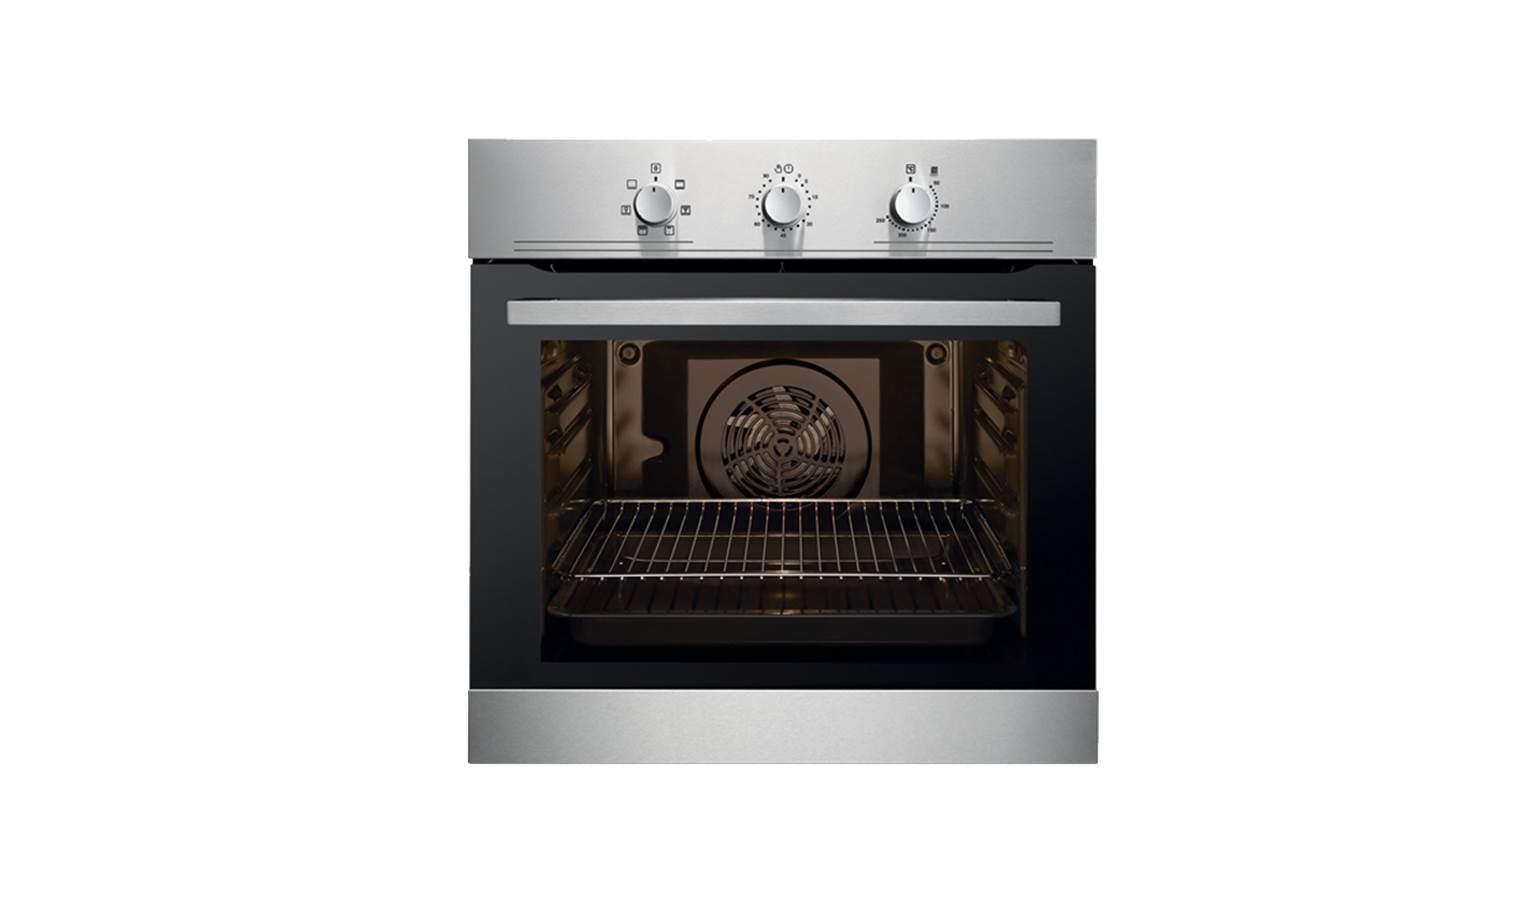 Electrolux Built In Oven - malaykiews